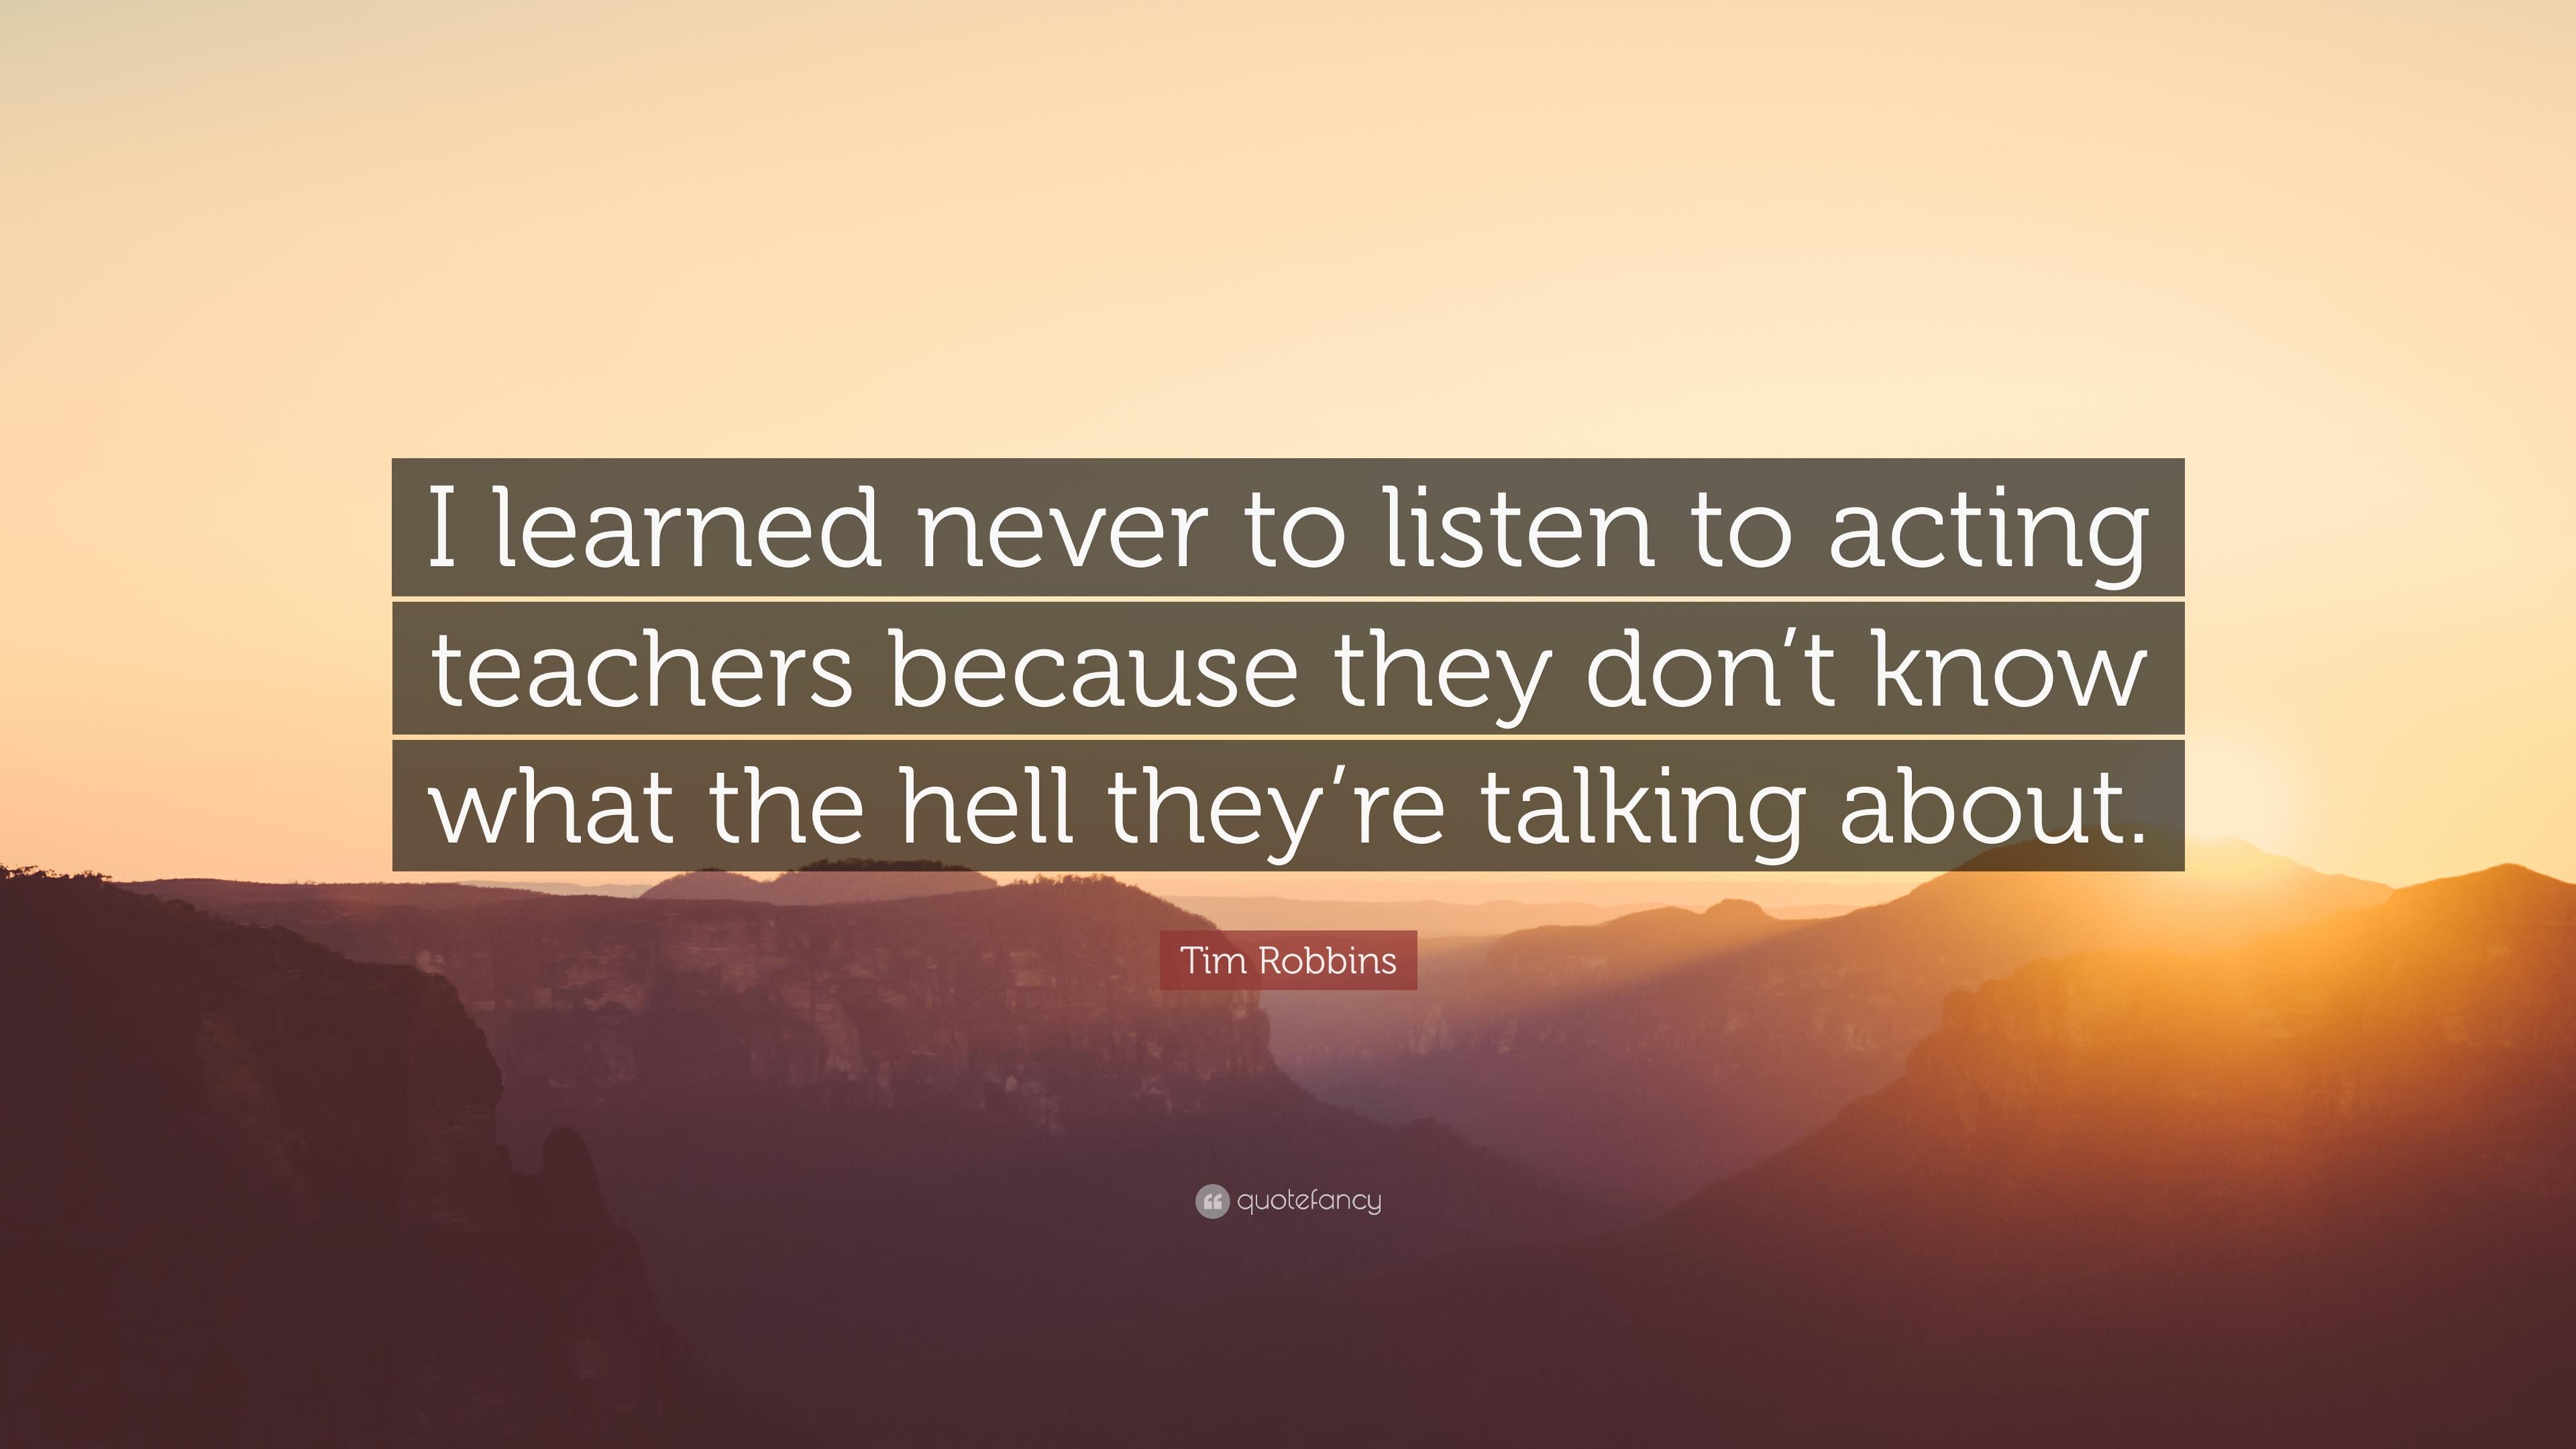 Tim Robbins Quote: “I learned never to listen to acting